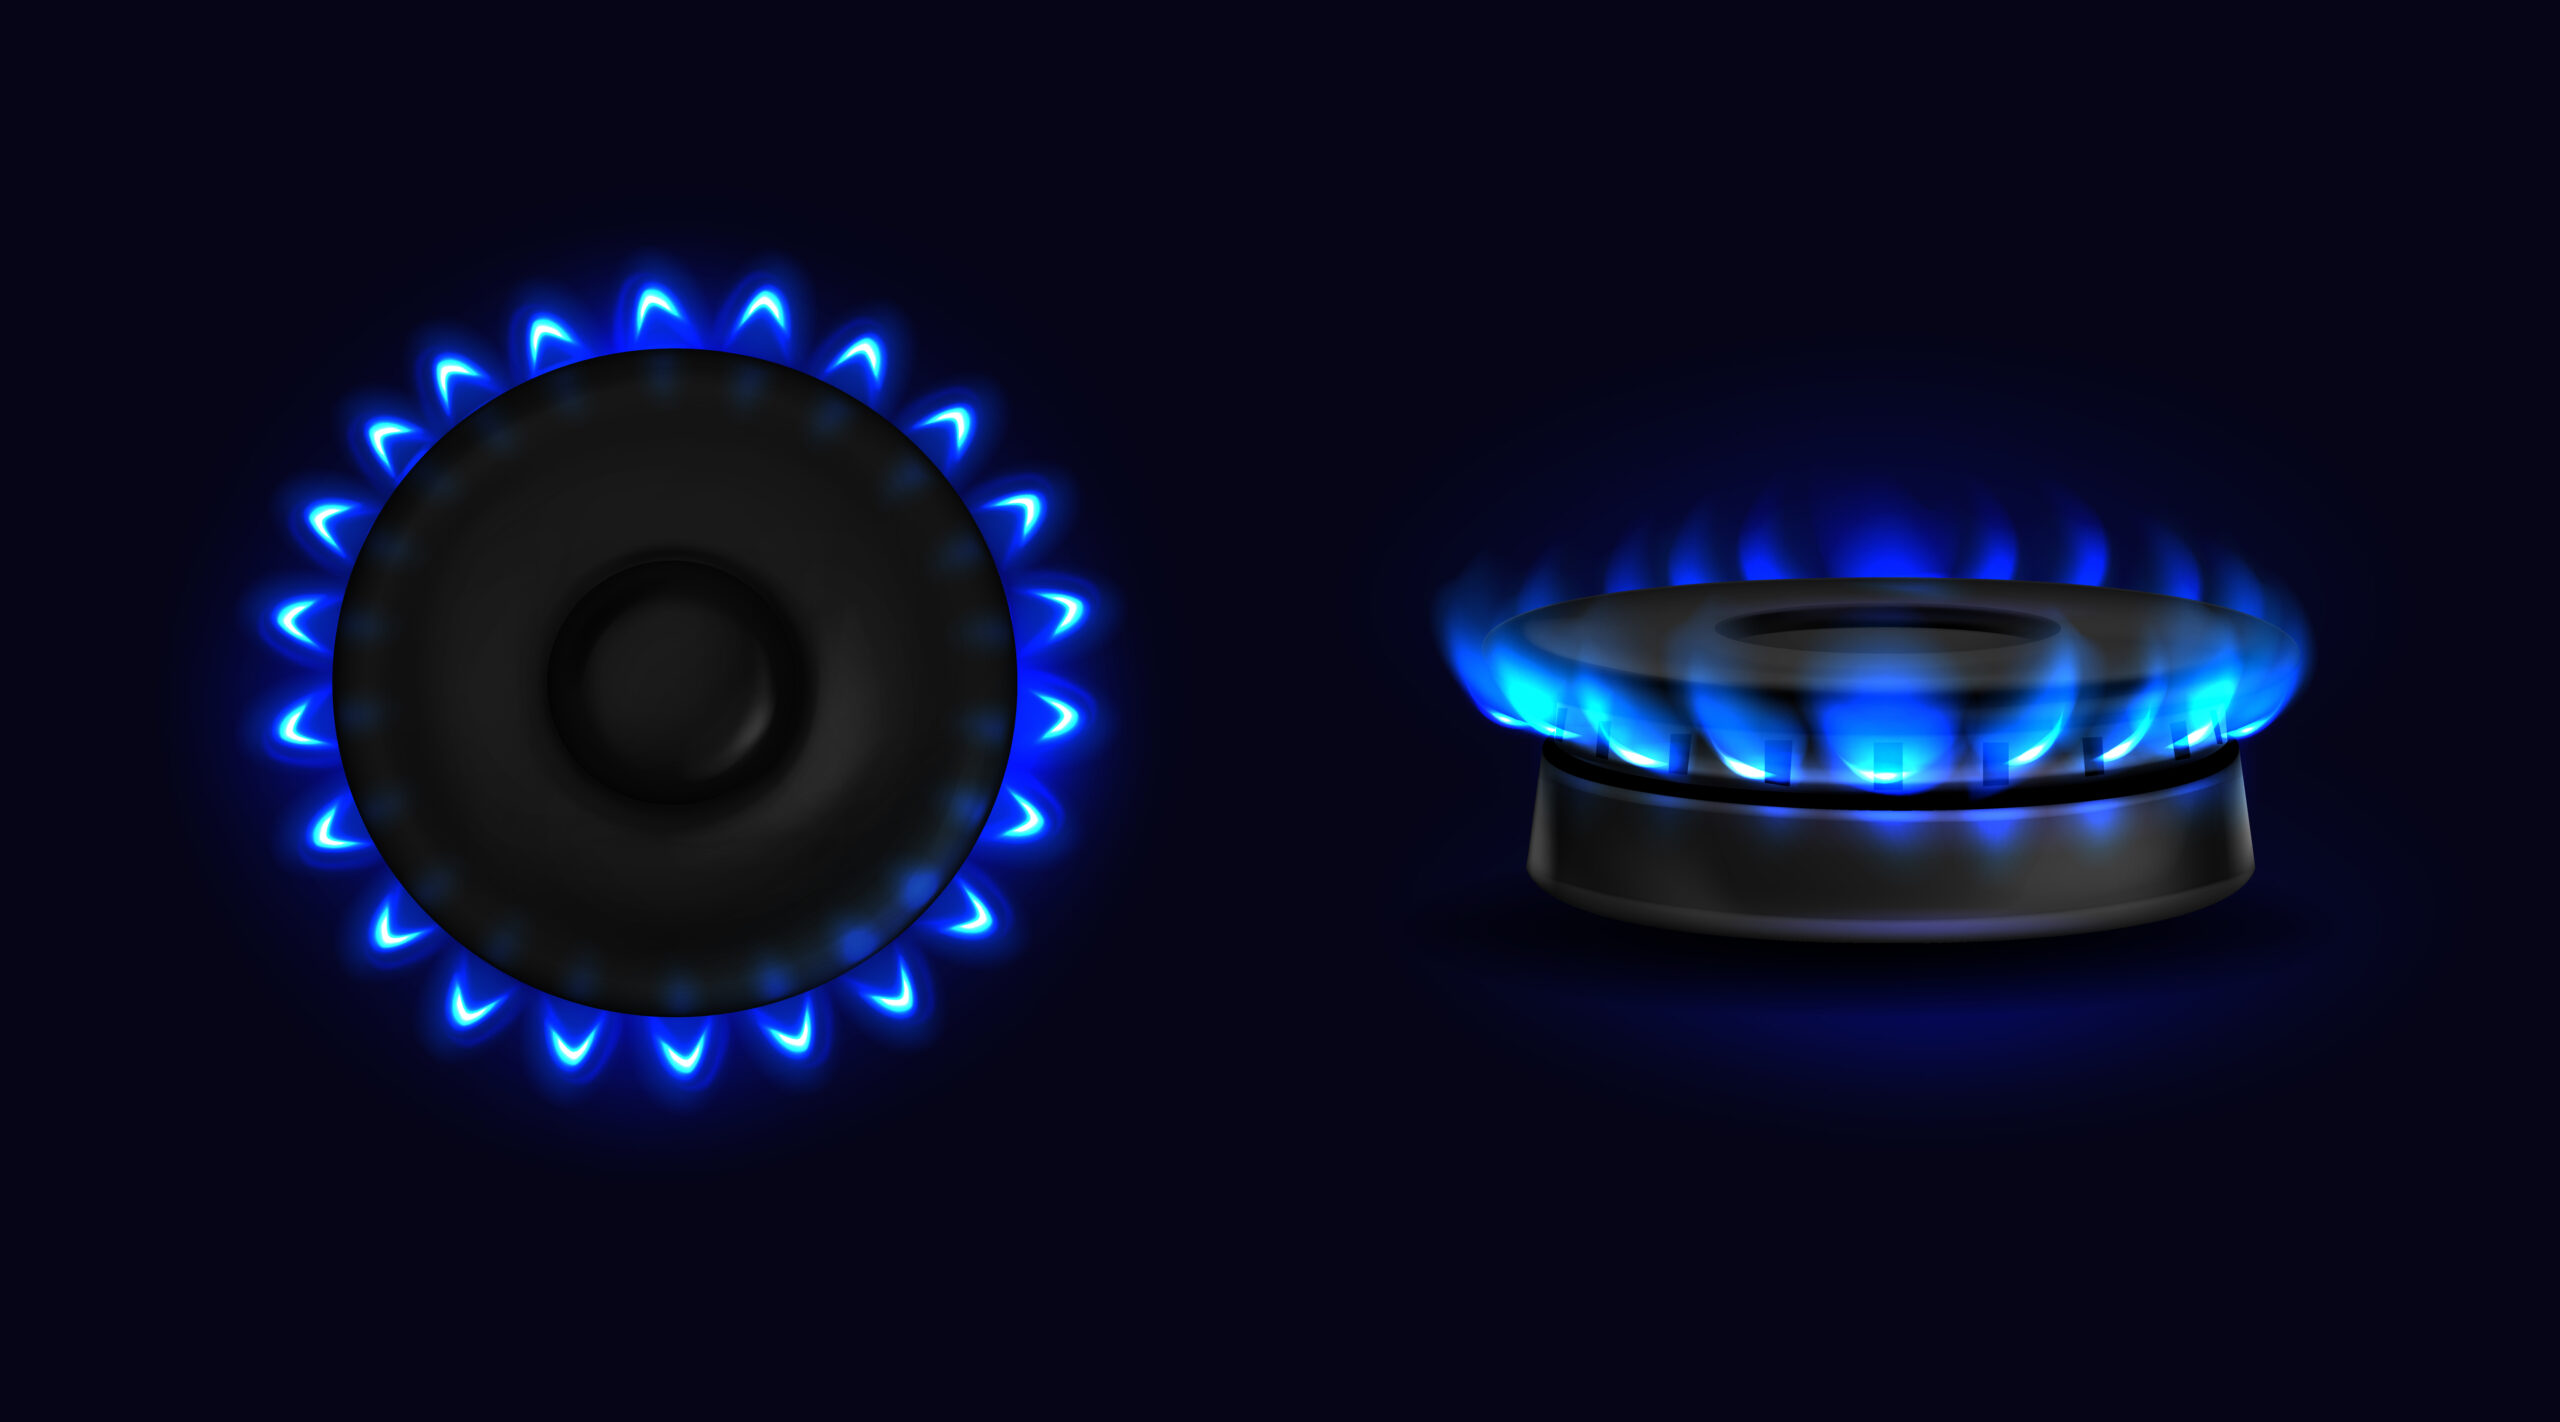 Burning gas stove with blue flame top or side view